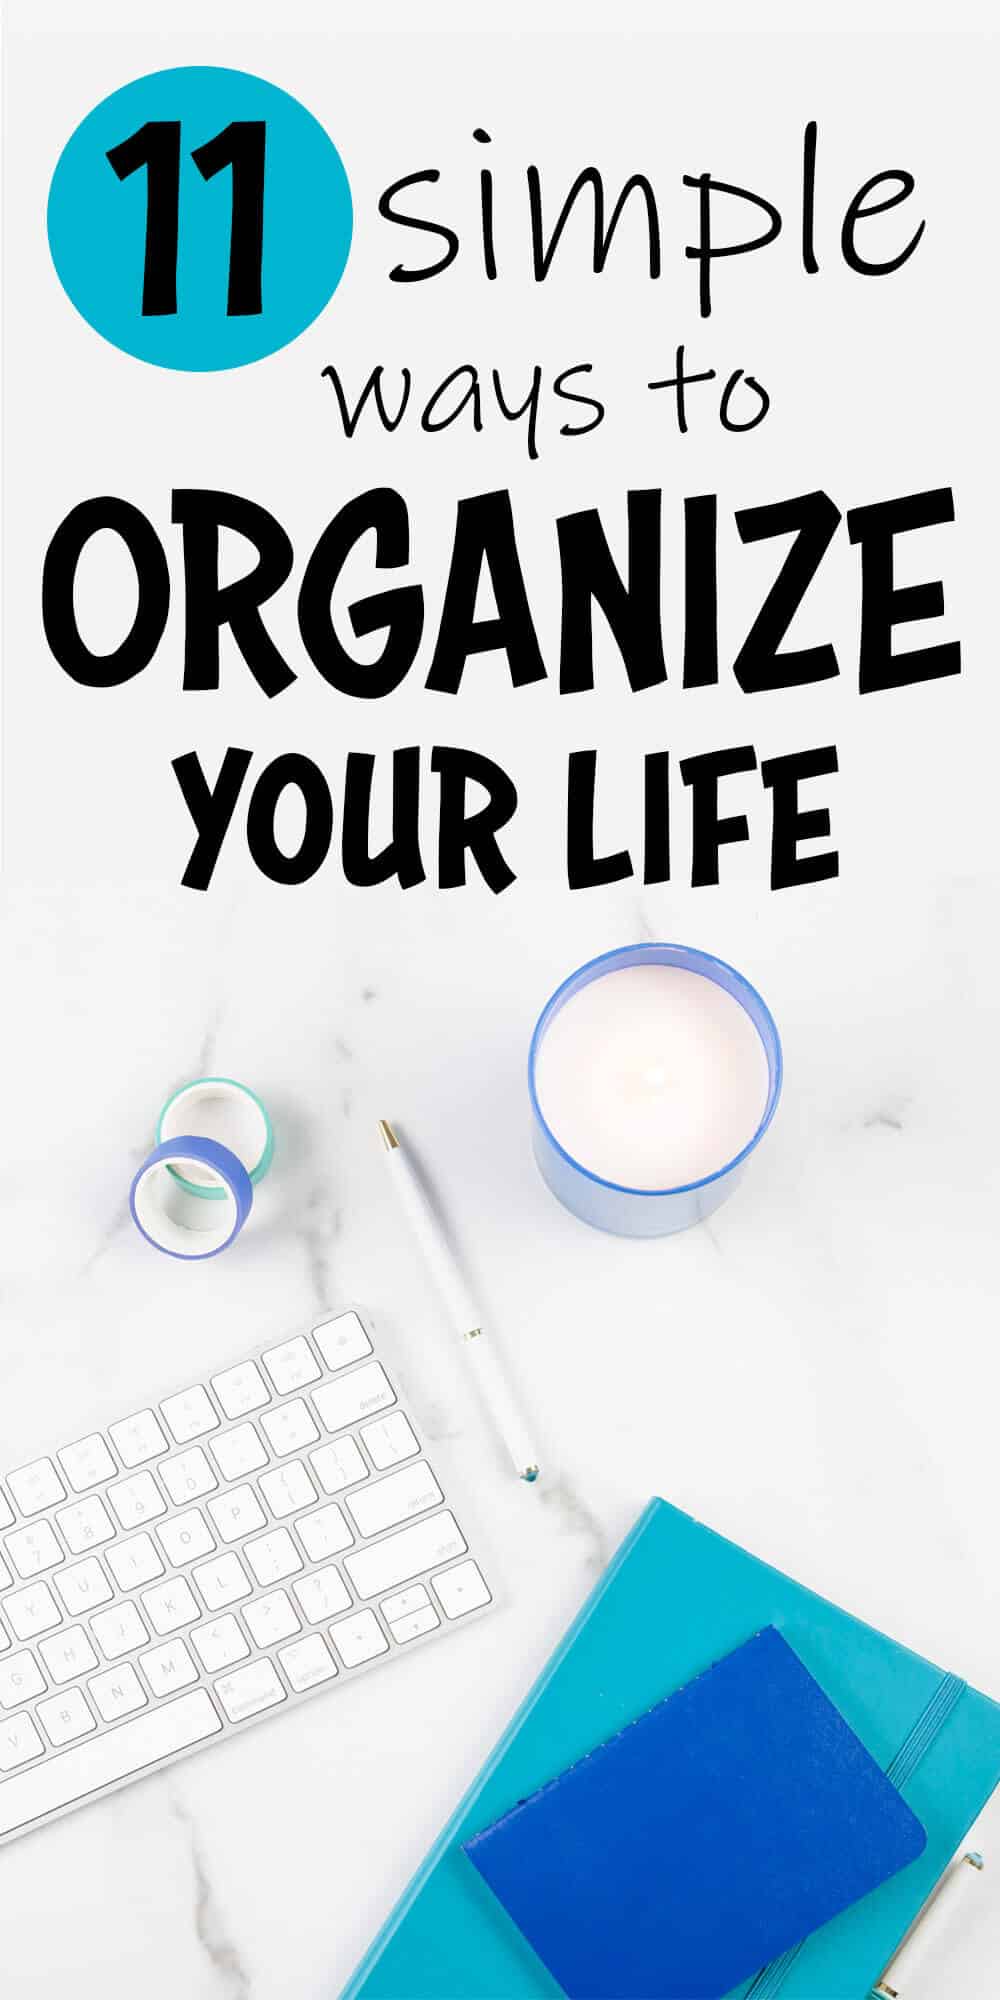 11 Simple Ways to Organize Your Life this Year